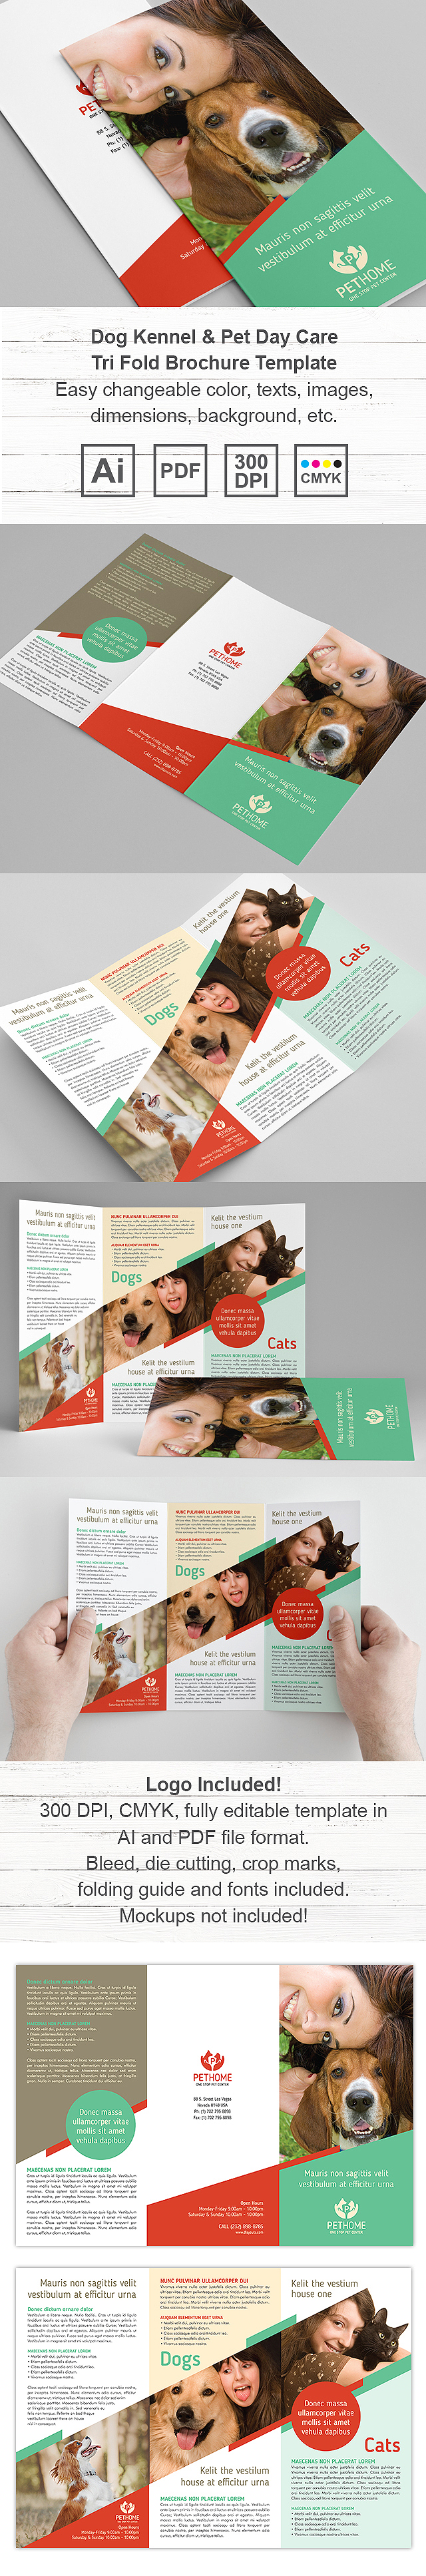 Dog Kennel & Pet Day Care Tri Fold Brochure Template